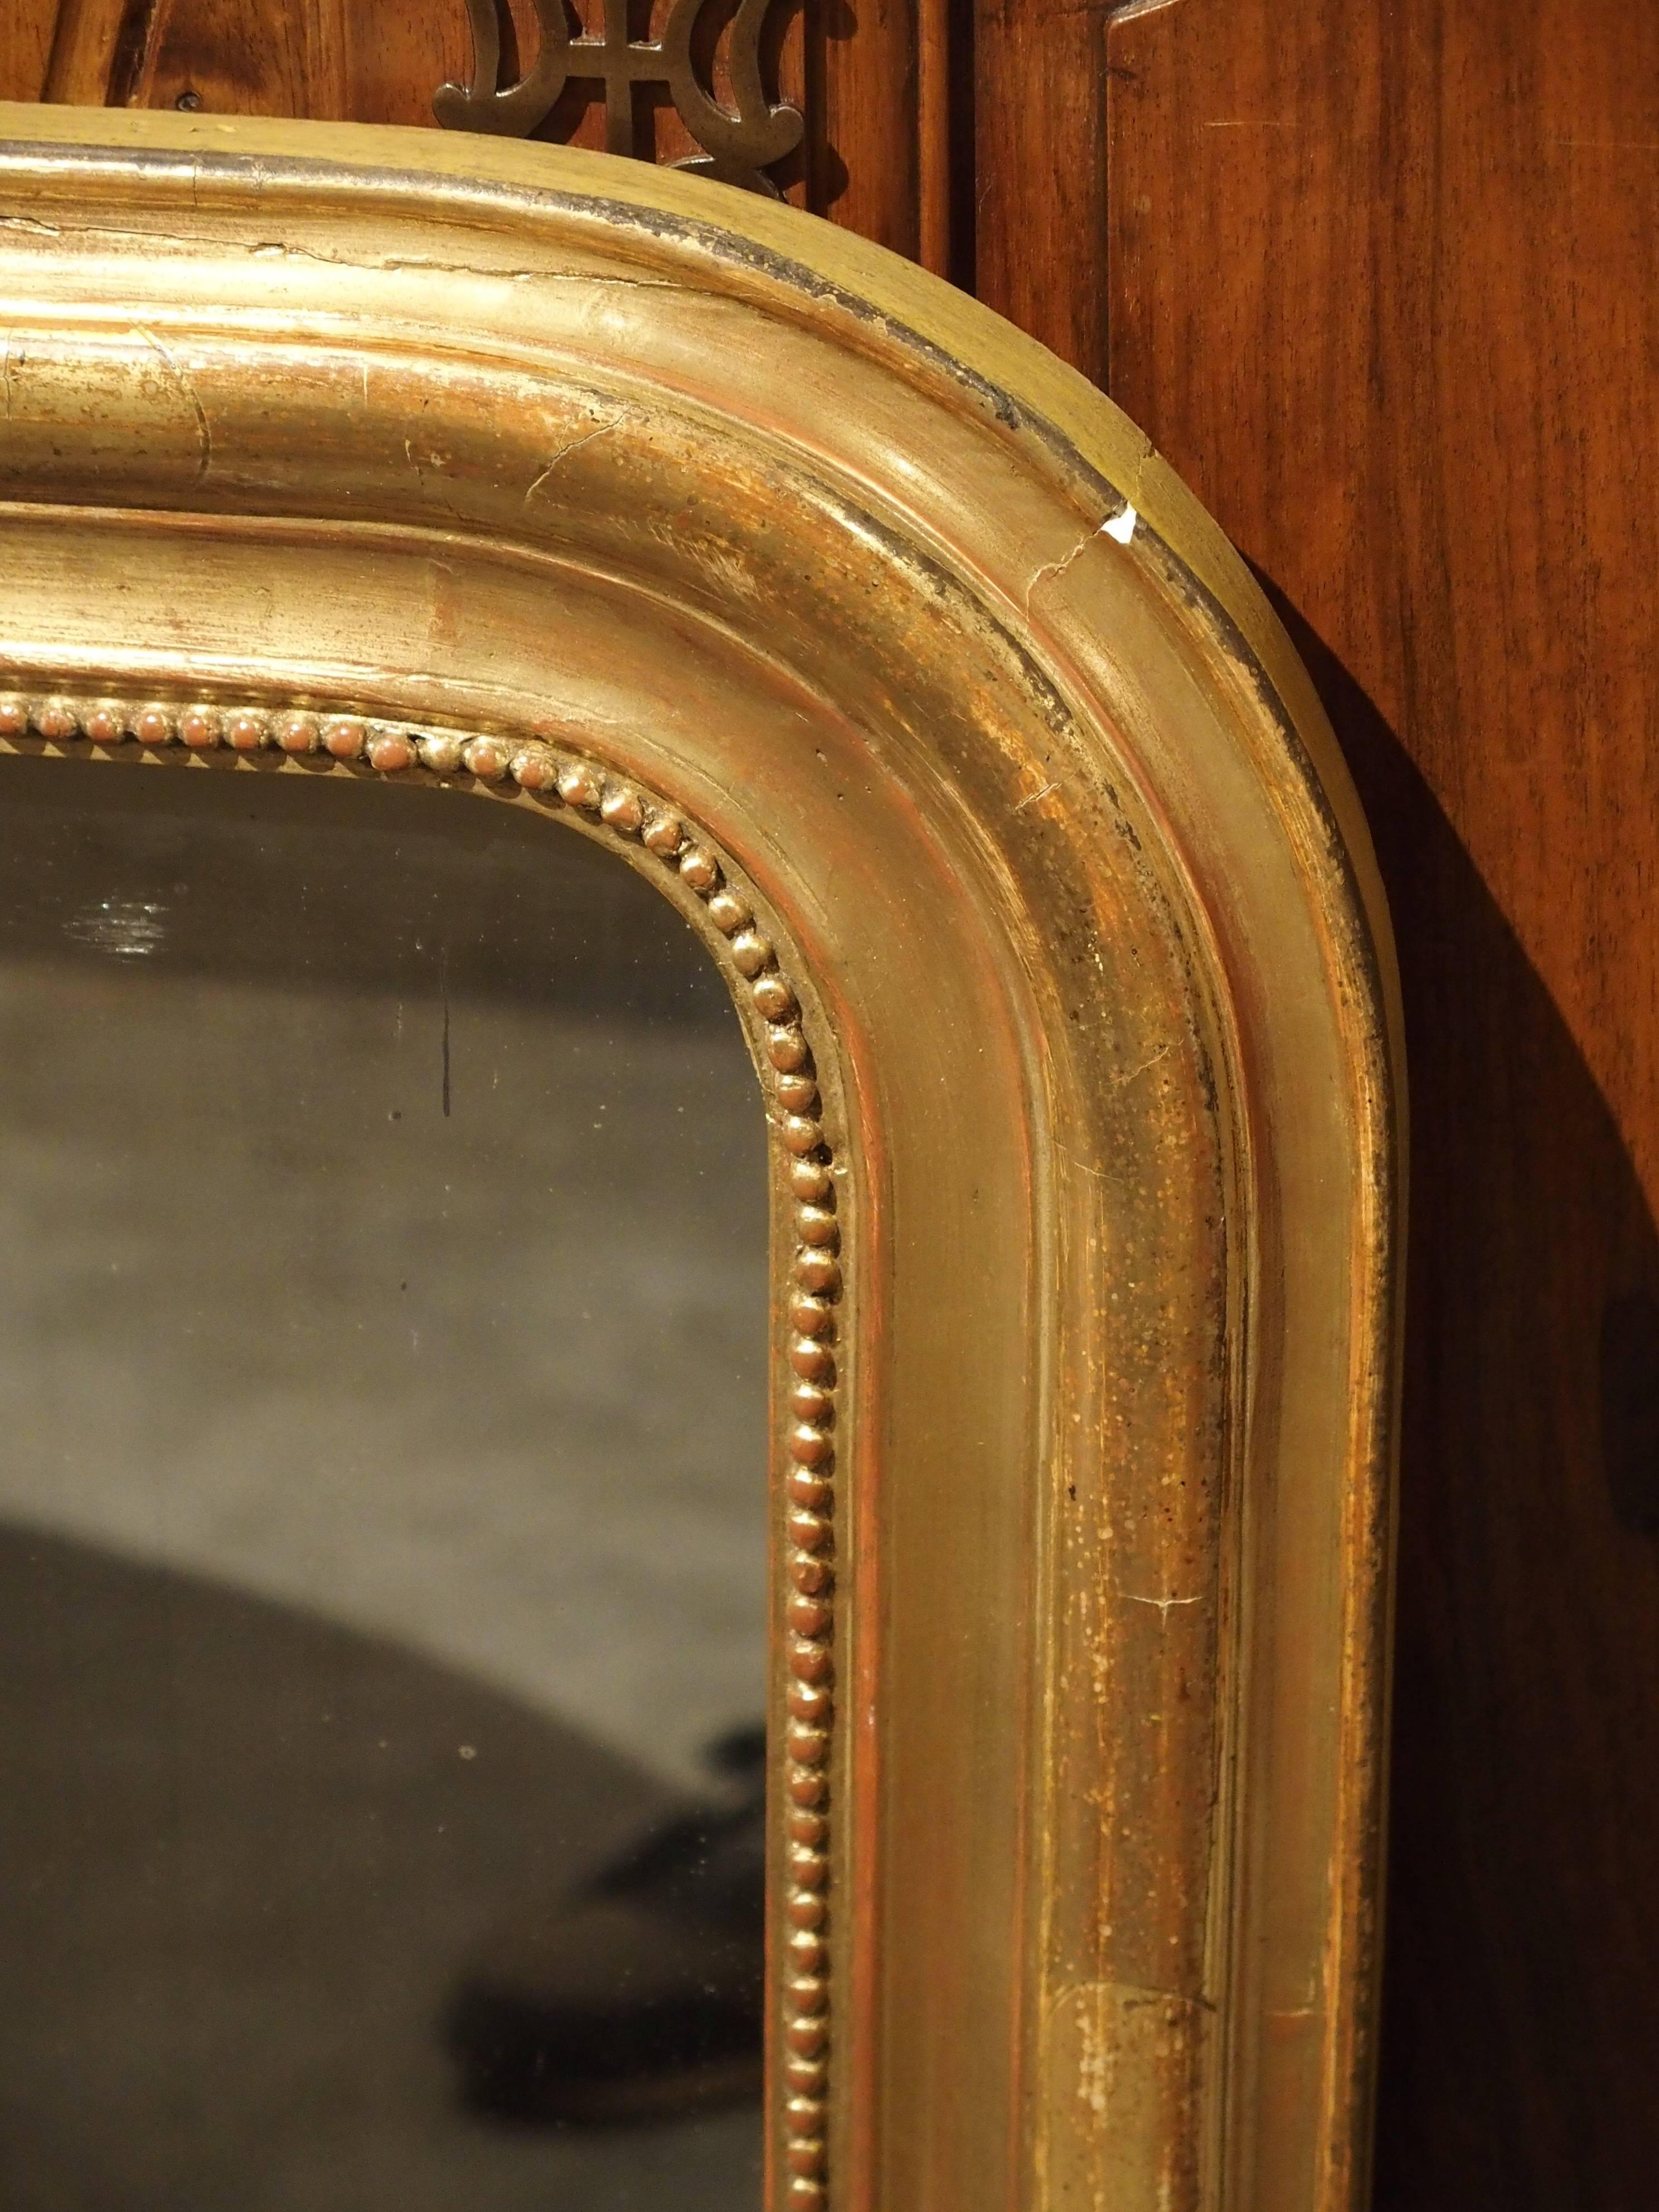 This versatile, clean lined, antique French Louis Philippe mirror is over 100 years old and can be used with almost any style of furnishing. Louis Philippe mirrors were made from the middle of the 1800s through the last half of the 19th century. On